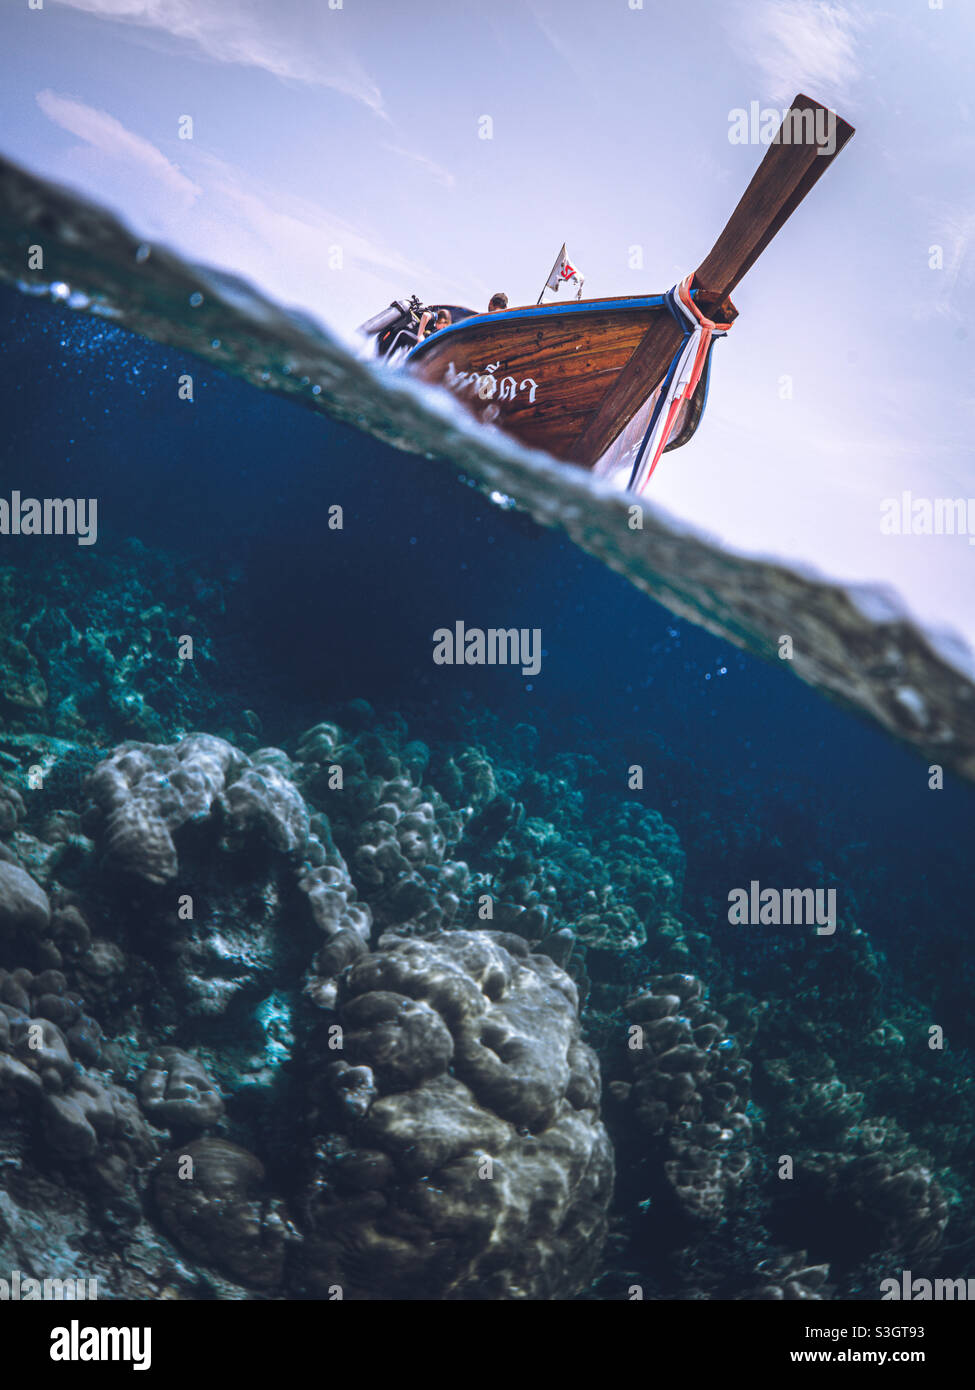 Long tail wooden boat tipic fromThailand going to snorkeling into the blue and clear water Stock Photo